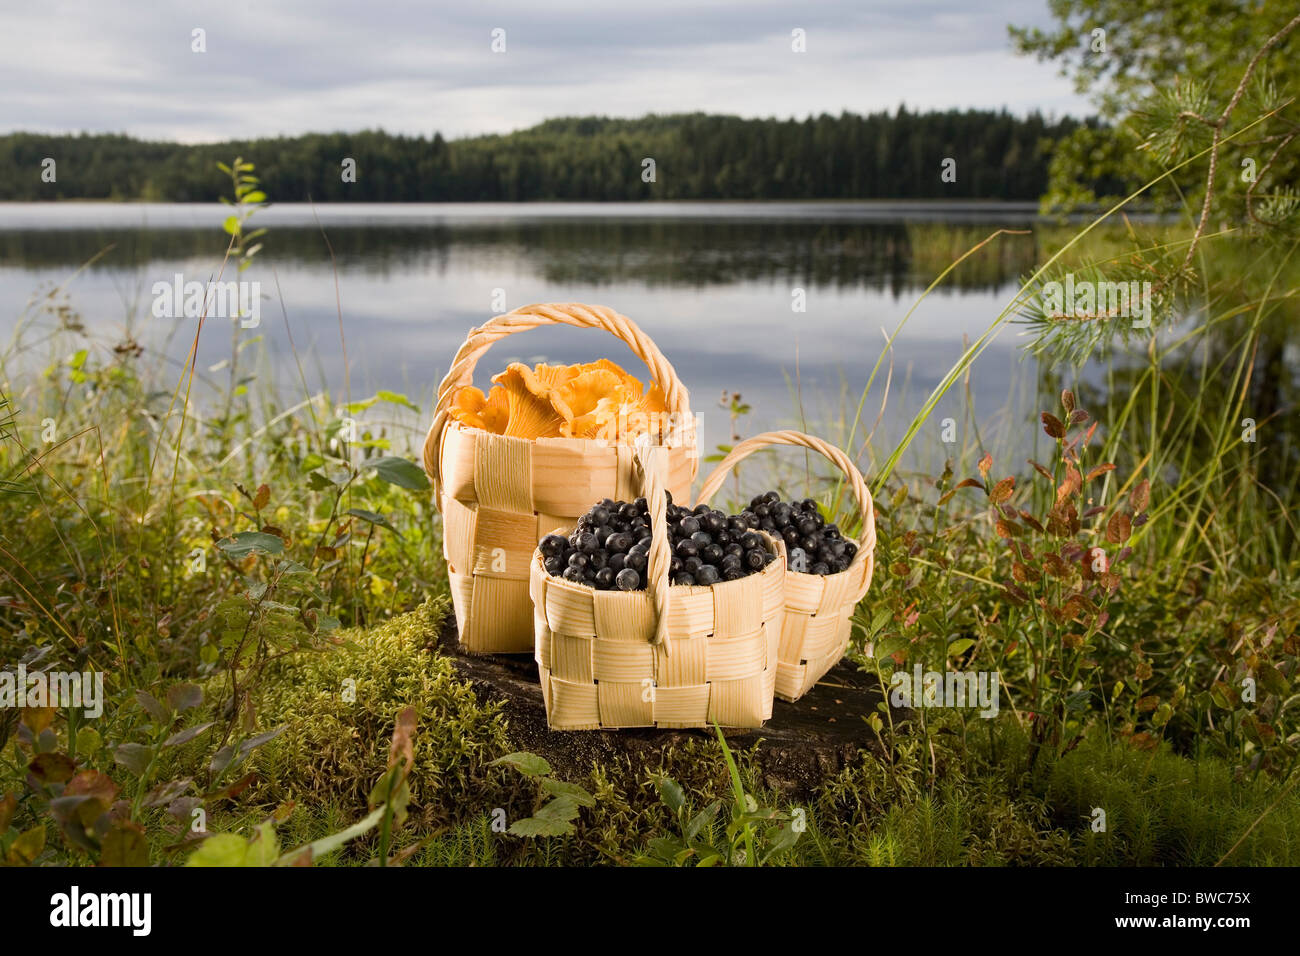 Berries and mushrooms in baskets by lake Stock Photo